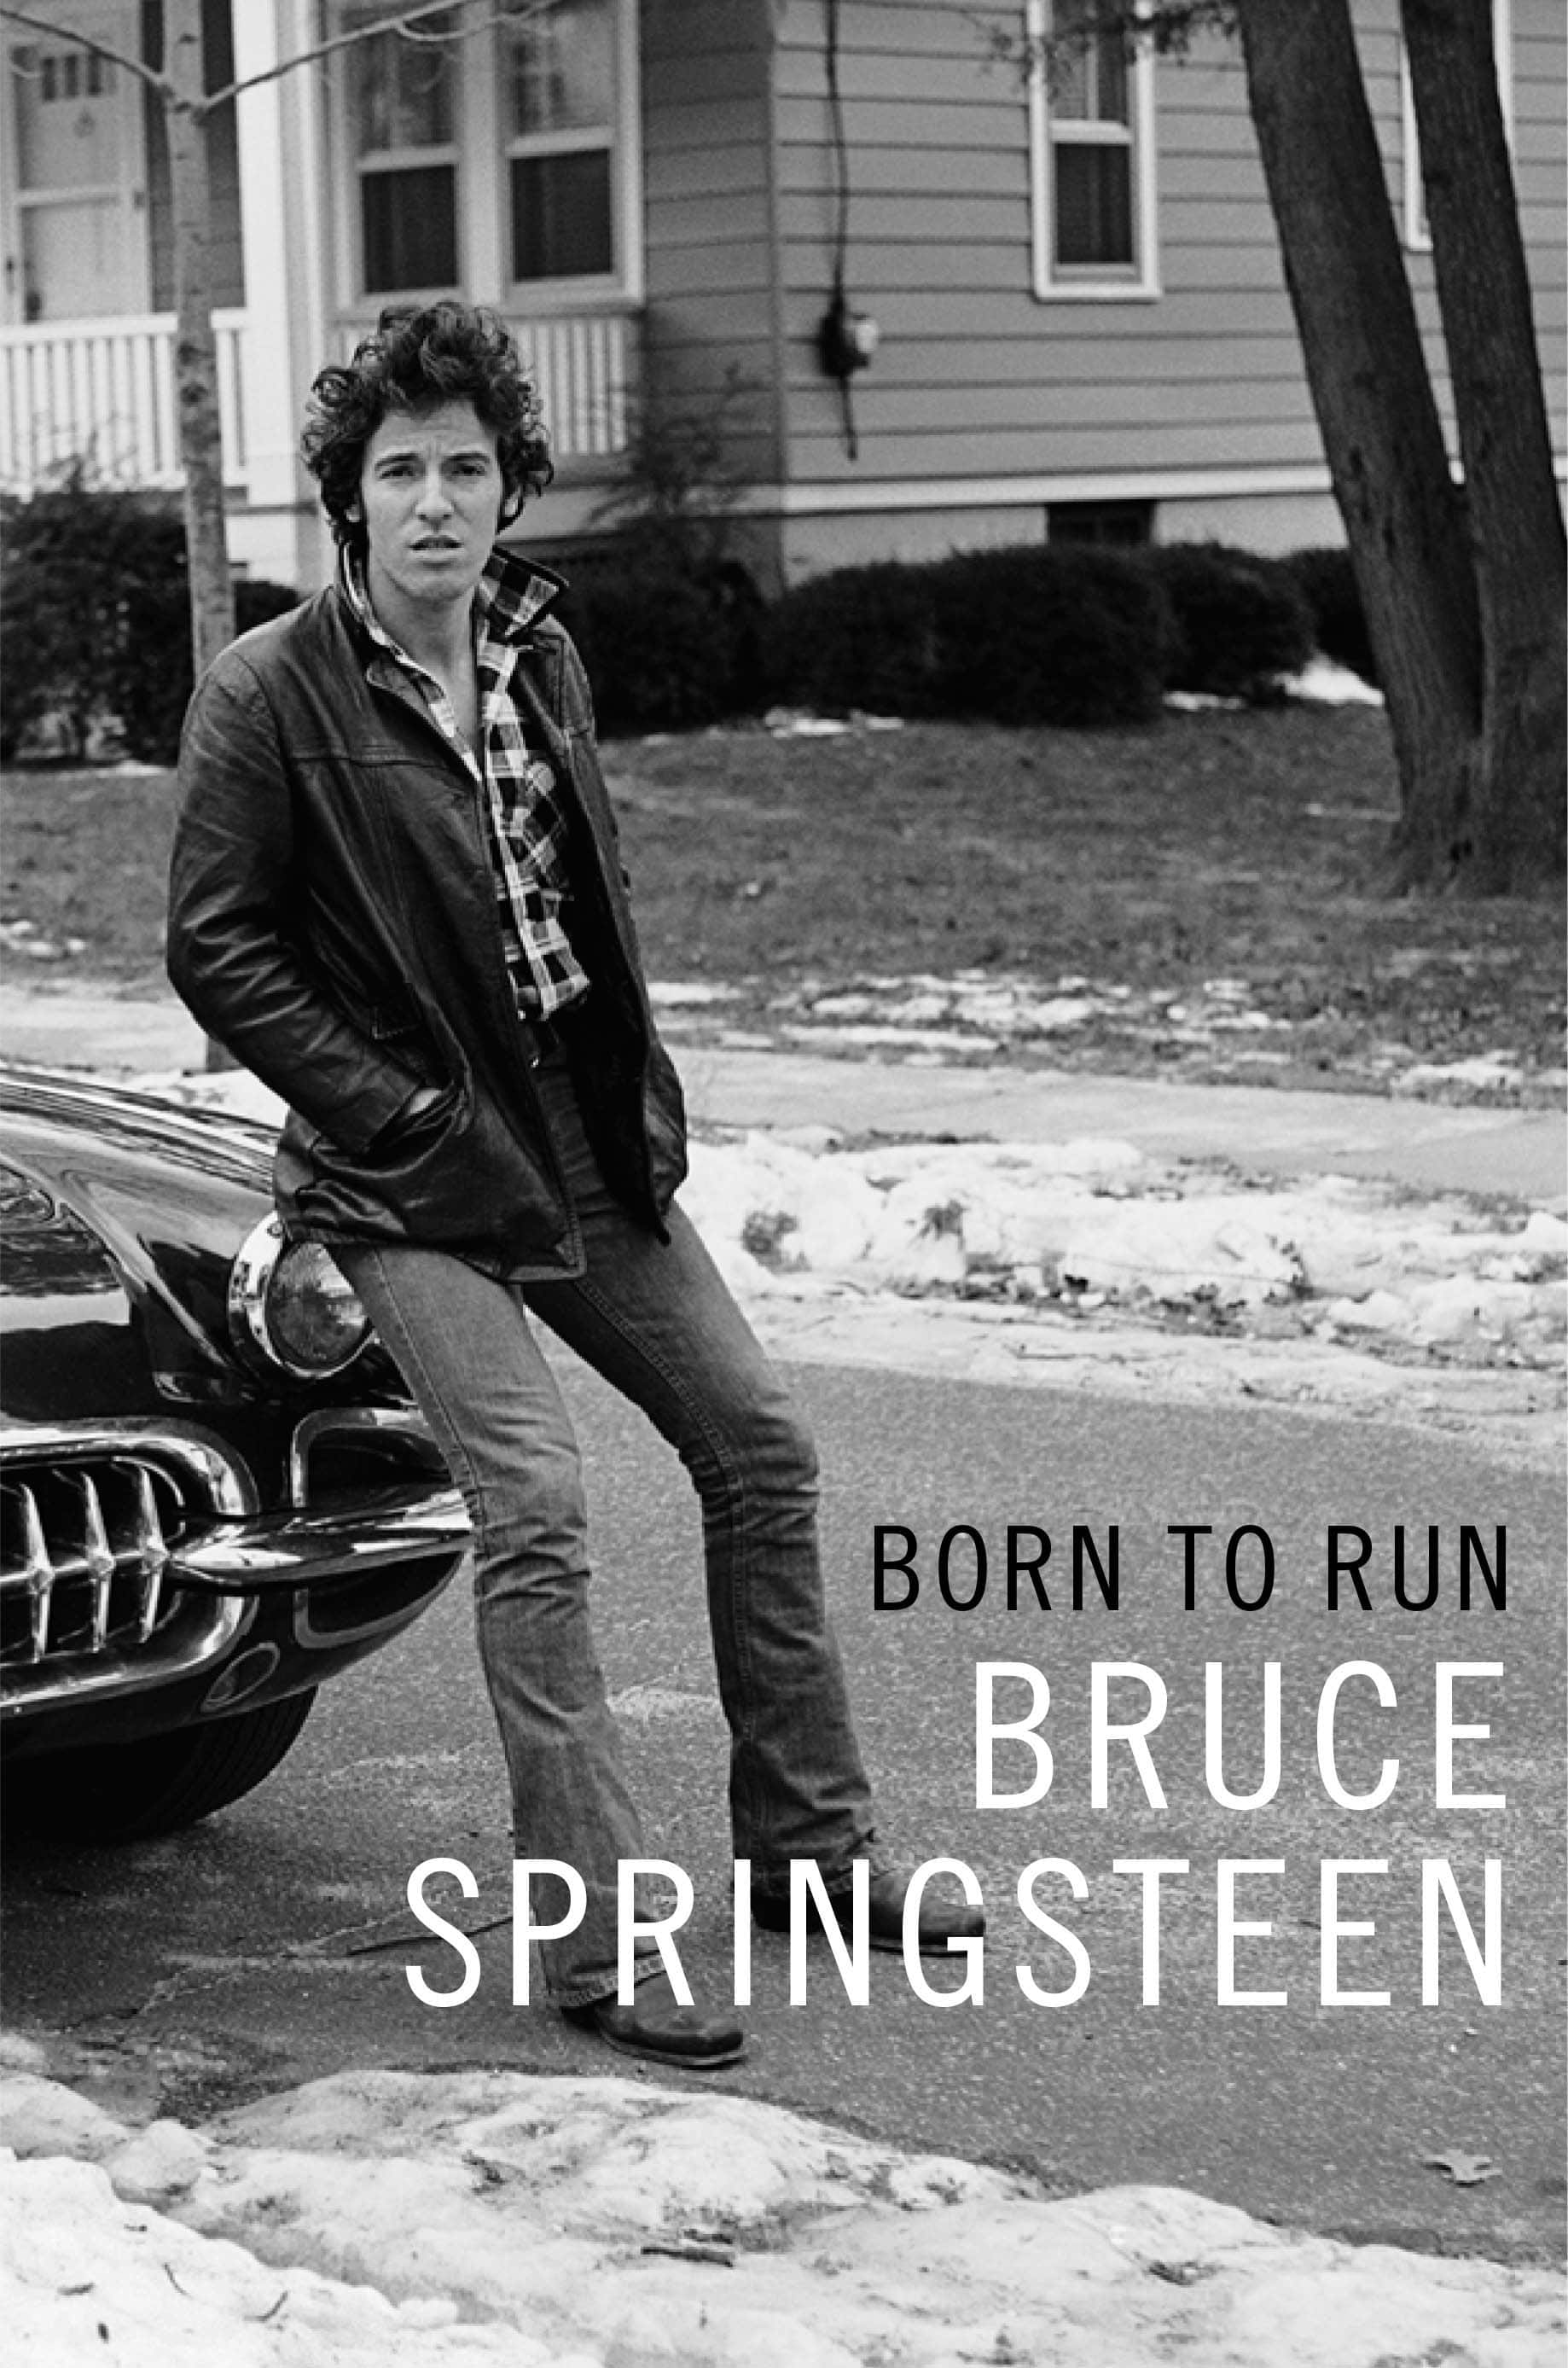 Watch Bruce Springsteen Read From Forthcoming Memoir Born to Run